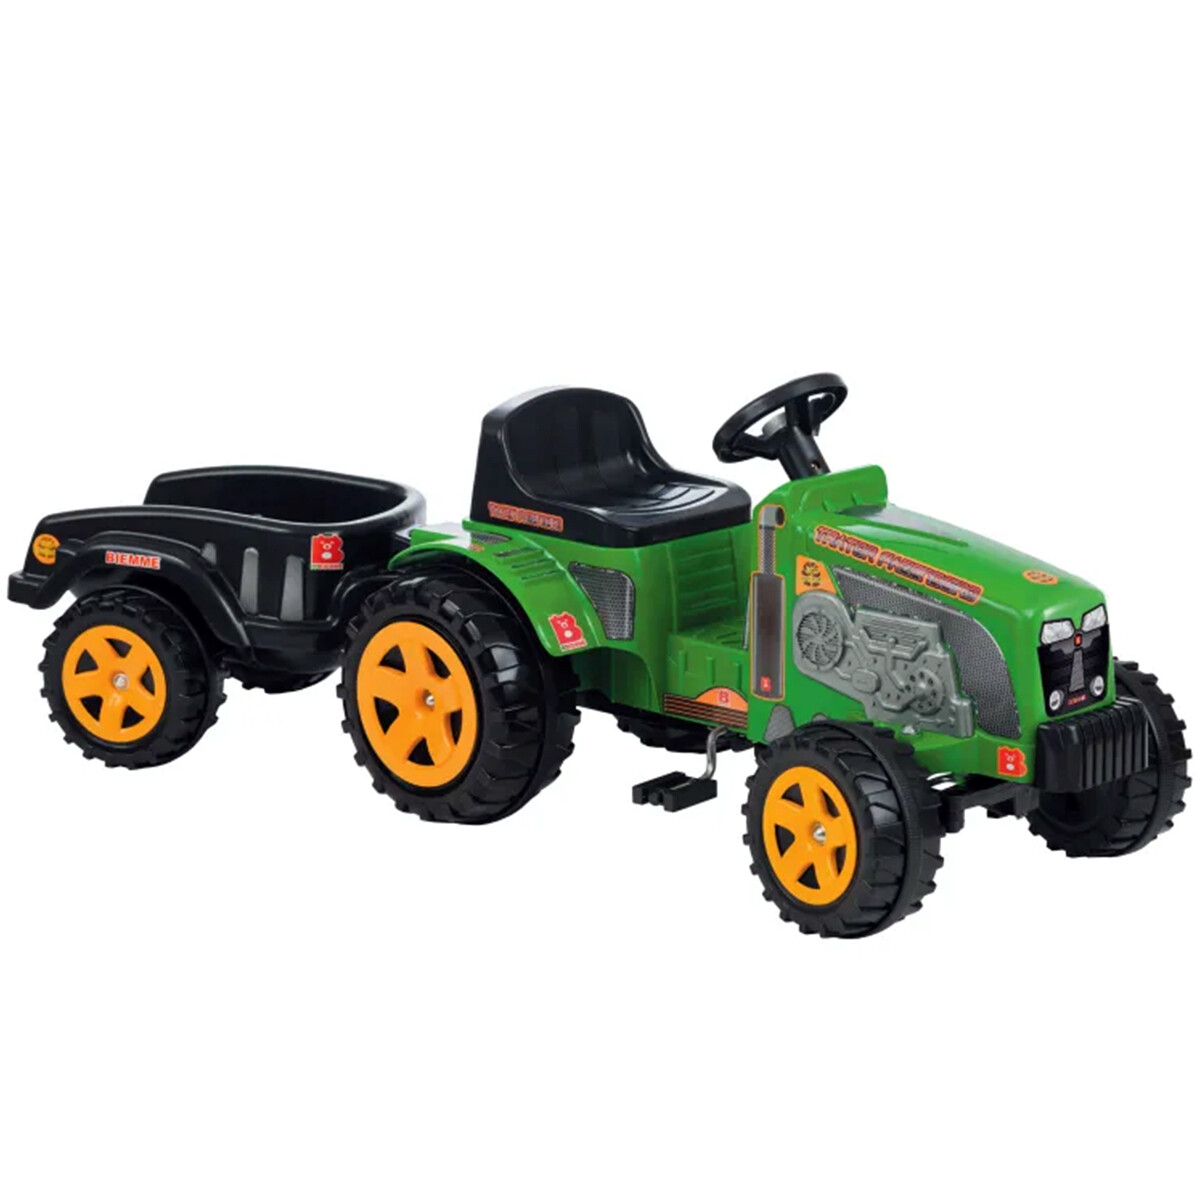 Auto Tractor A Pedal +Remolque Infantil Hecho Brasil 